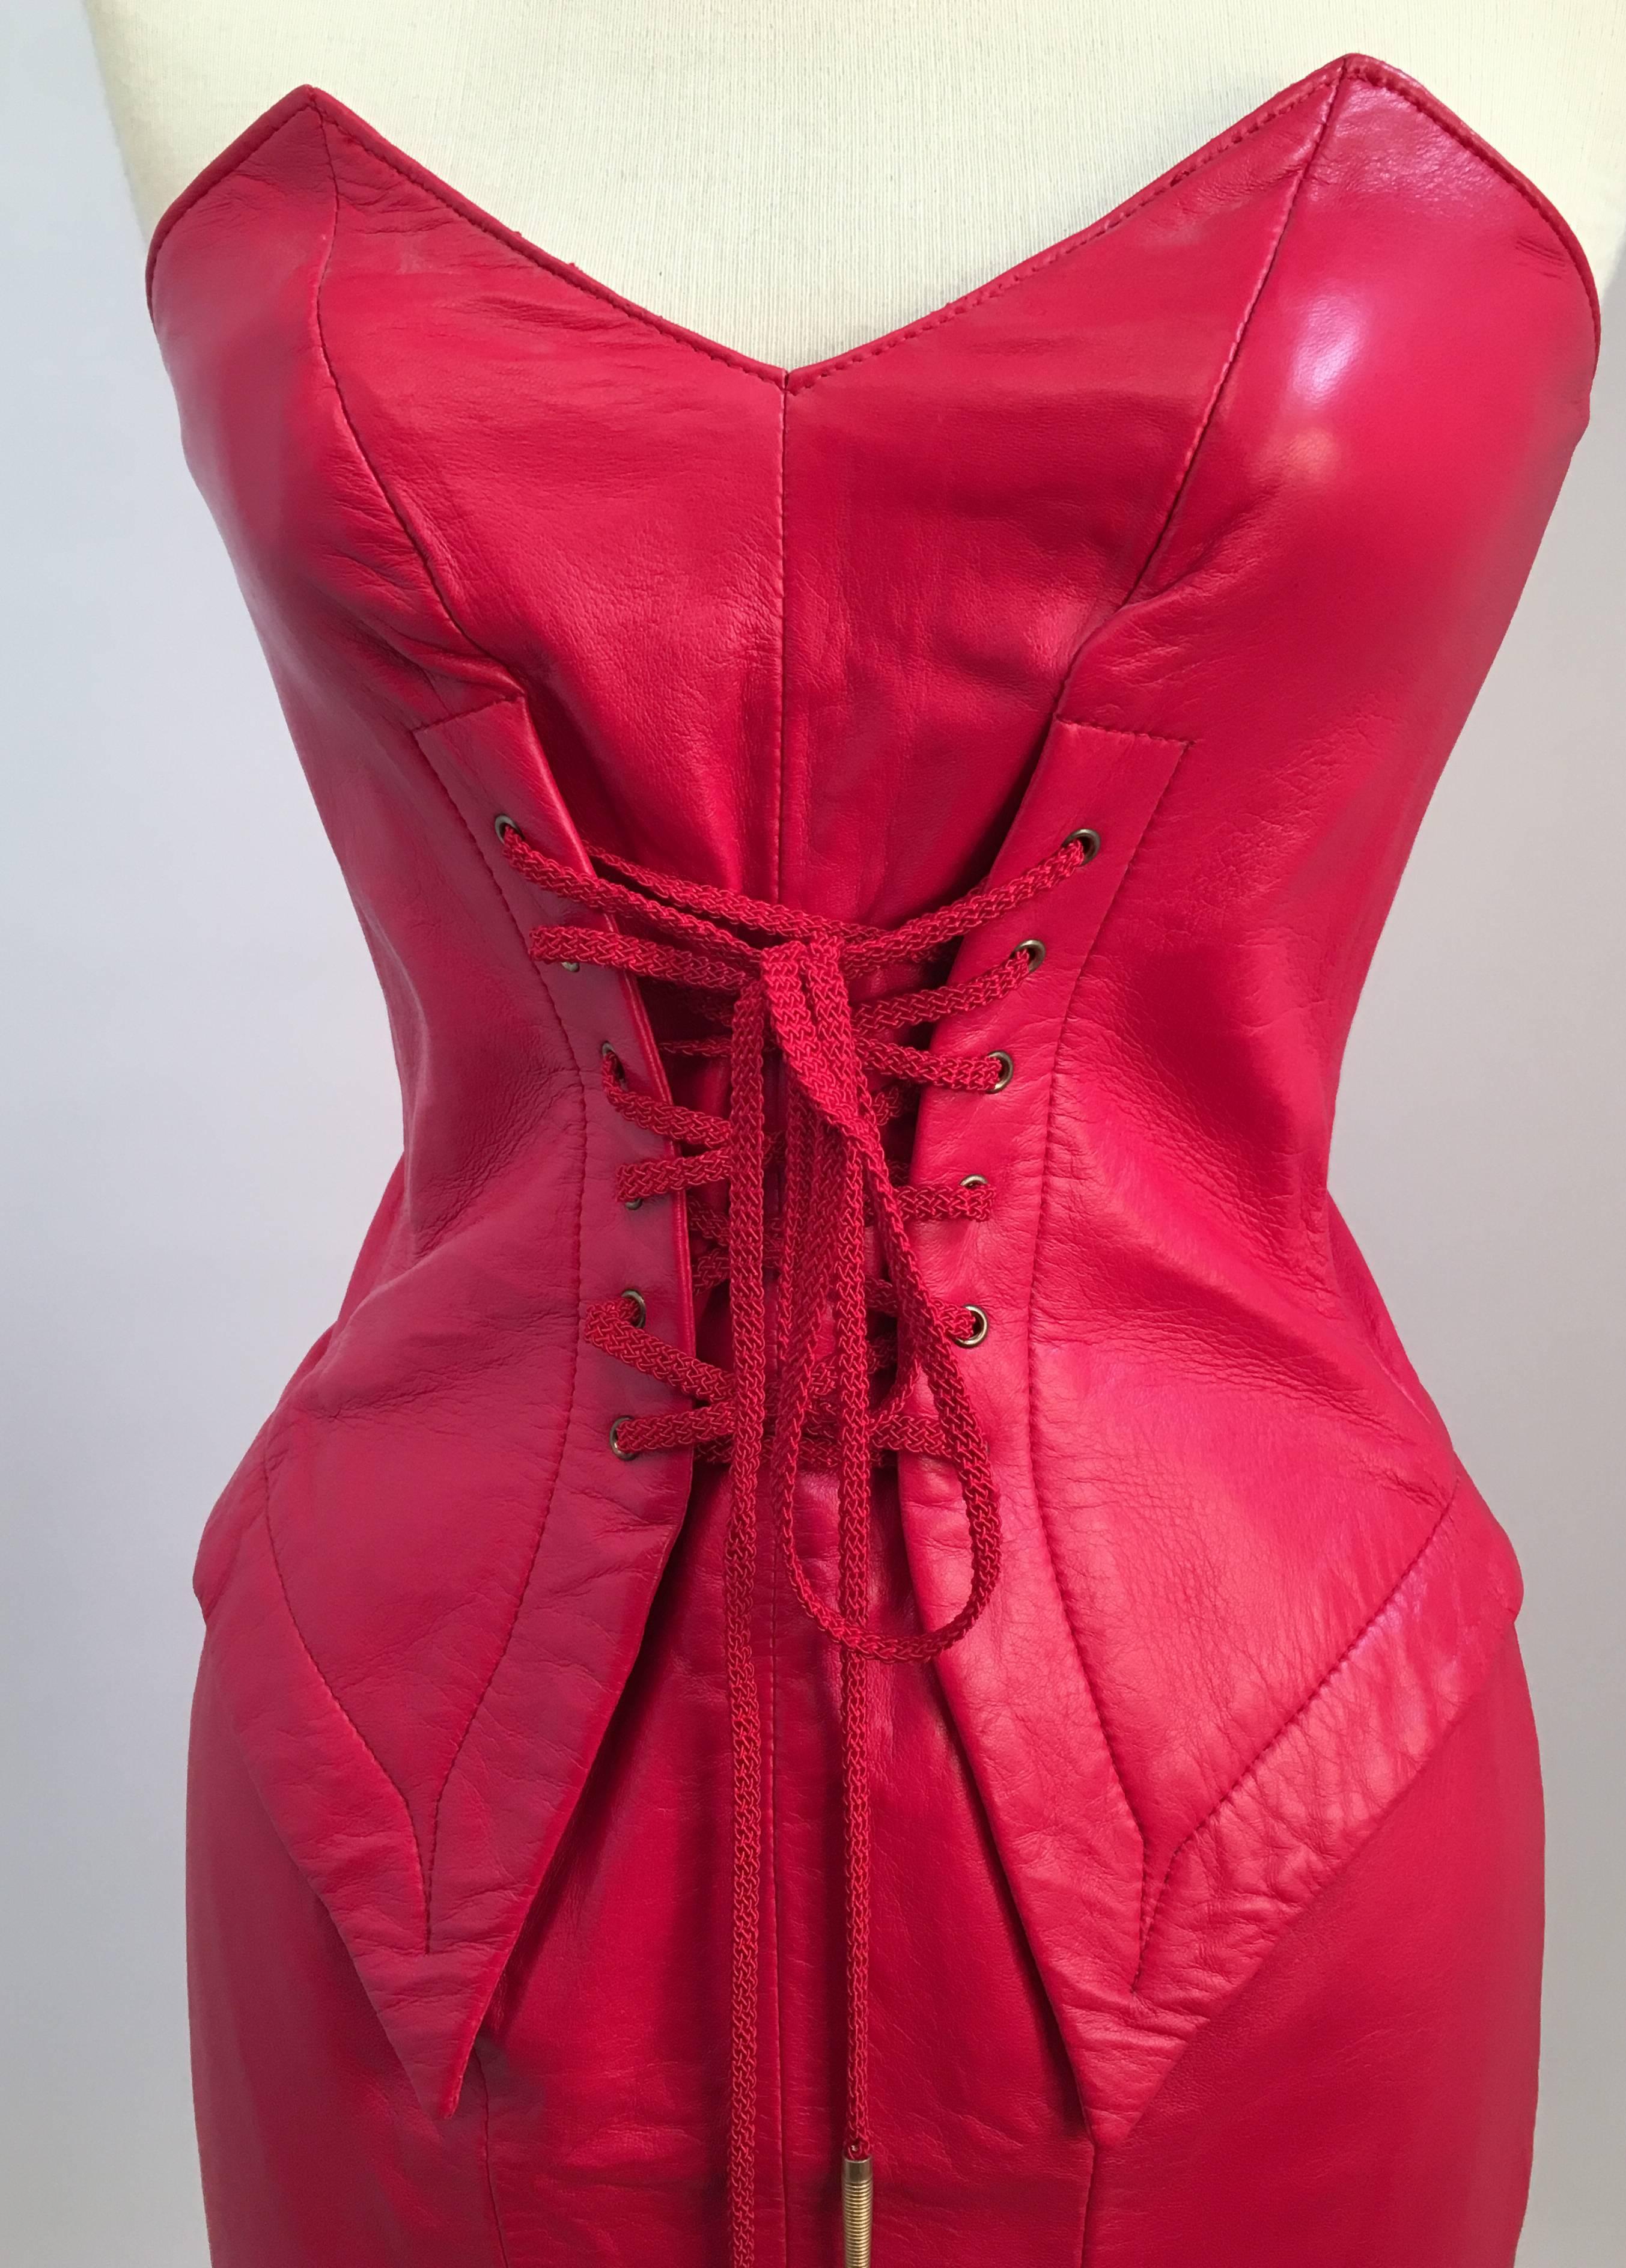 80s Michael Hoban North Beach Leather Bright Red Lace Up Mini Dress. Strapless dress zips up back. Corset laced front with bola tips. 